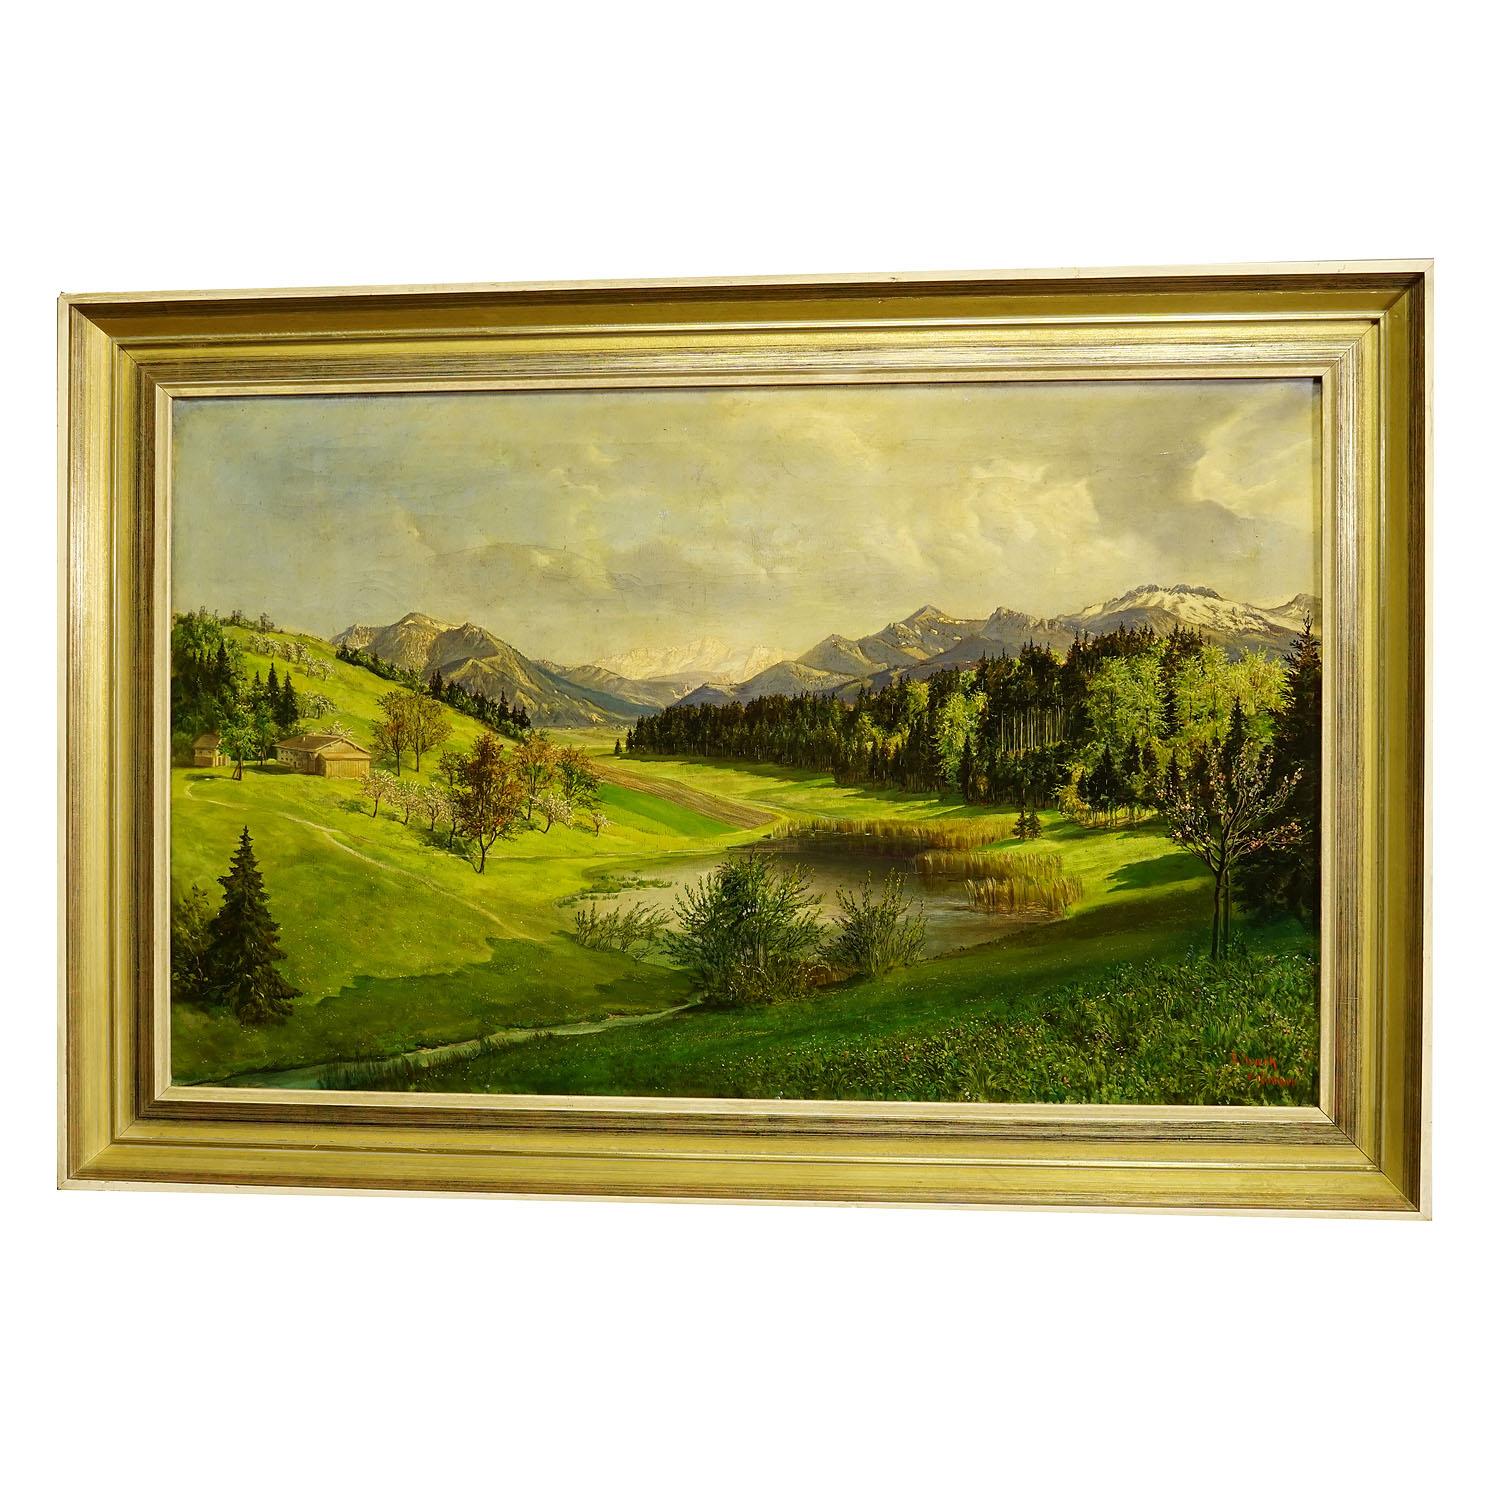 High mountain grass landscape with Alpine Lake in Bavaria, circa 1930s

A large impressionistic oil painting depicting a meadow landscape with mountain lake and farmers courtyard in front the Chiemgauer Alps in Bavaria. Oil painting on canvas with